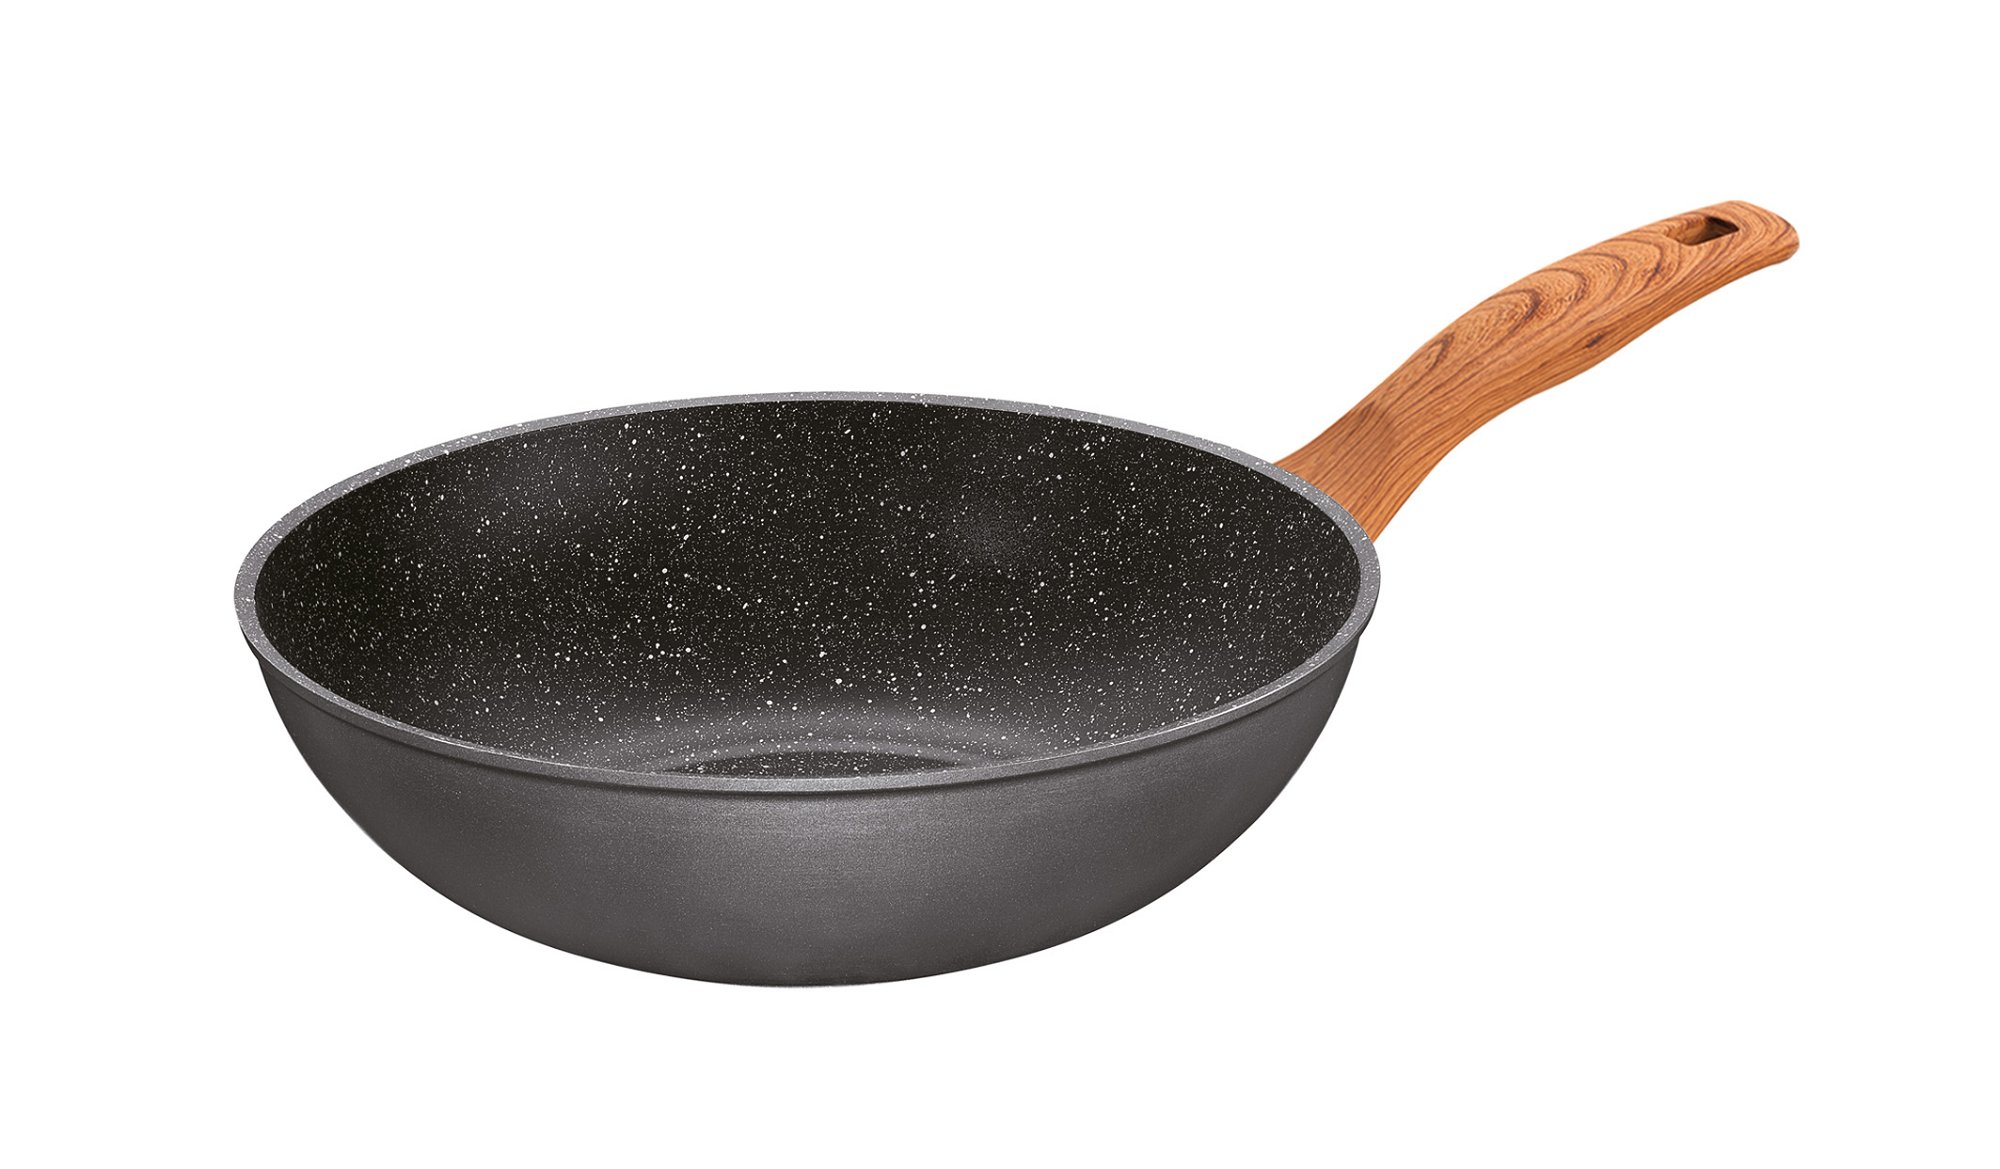 STONELINE® Back to Nature poêle wok 30 cm, Made in Germany, wok antiadhésif, convient pour induction